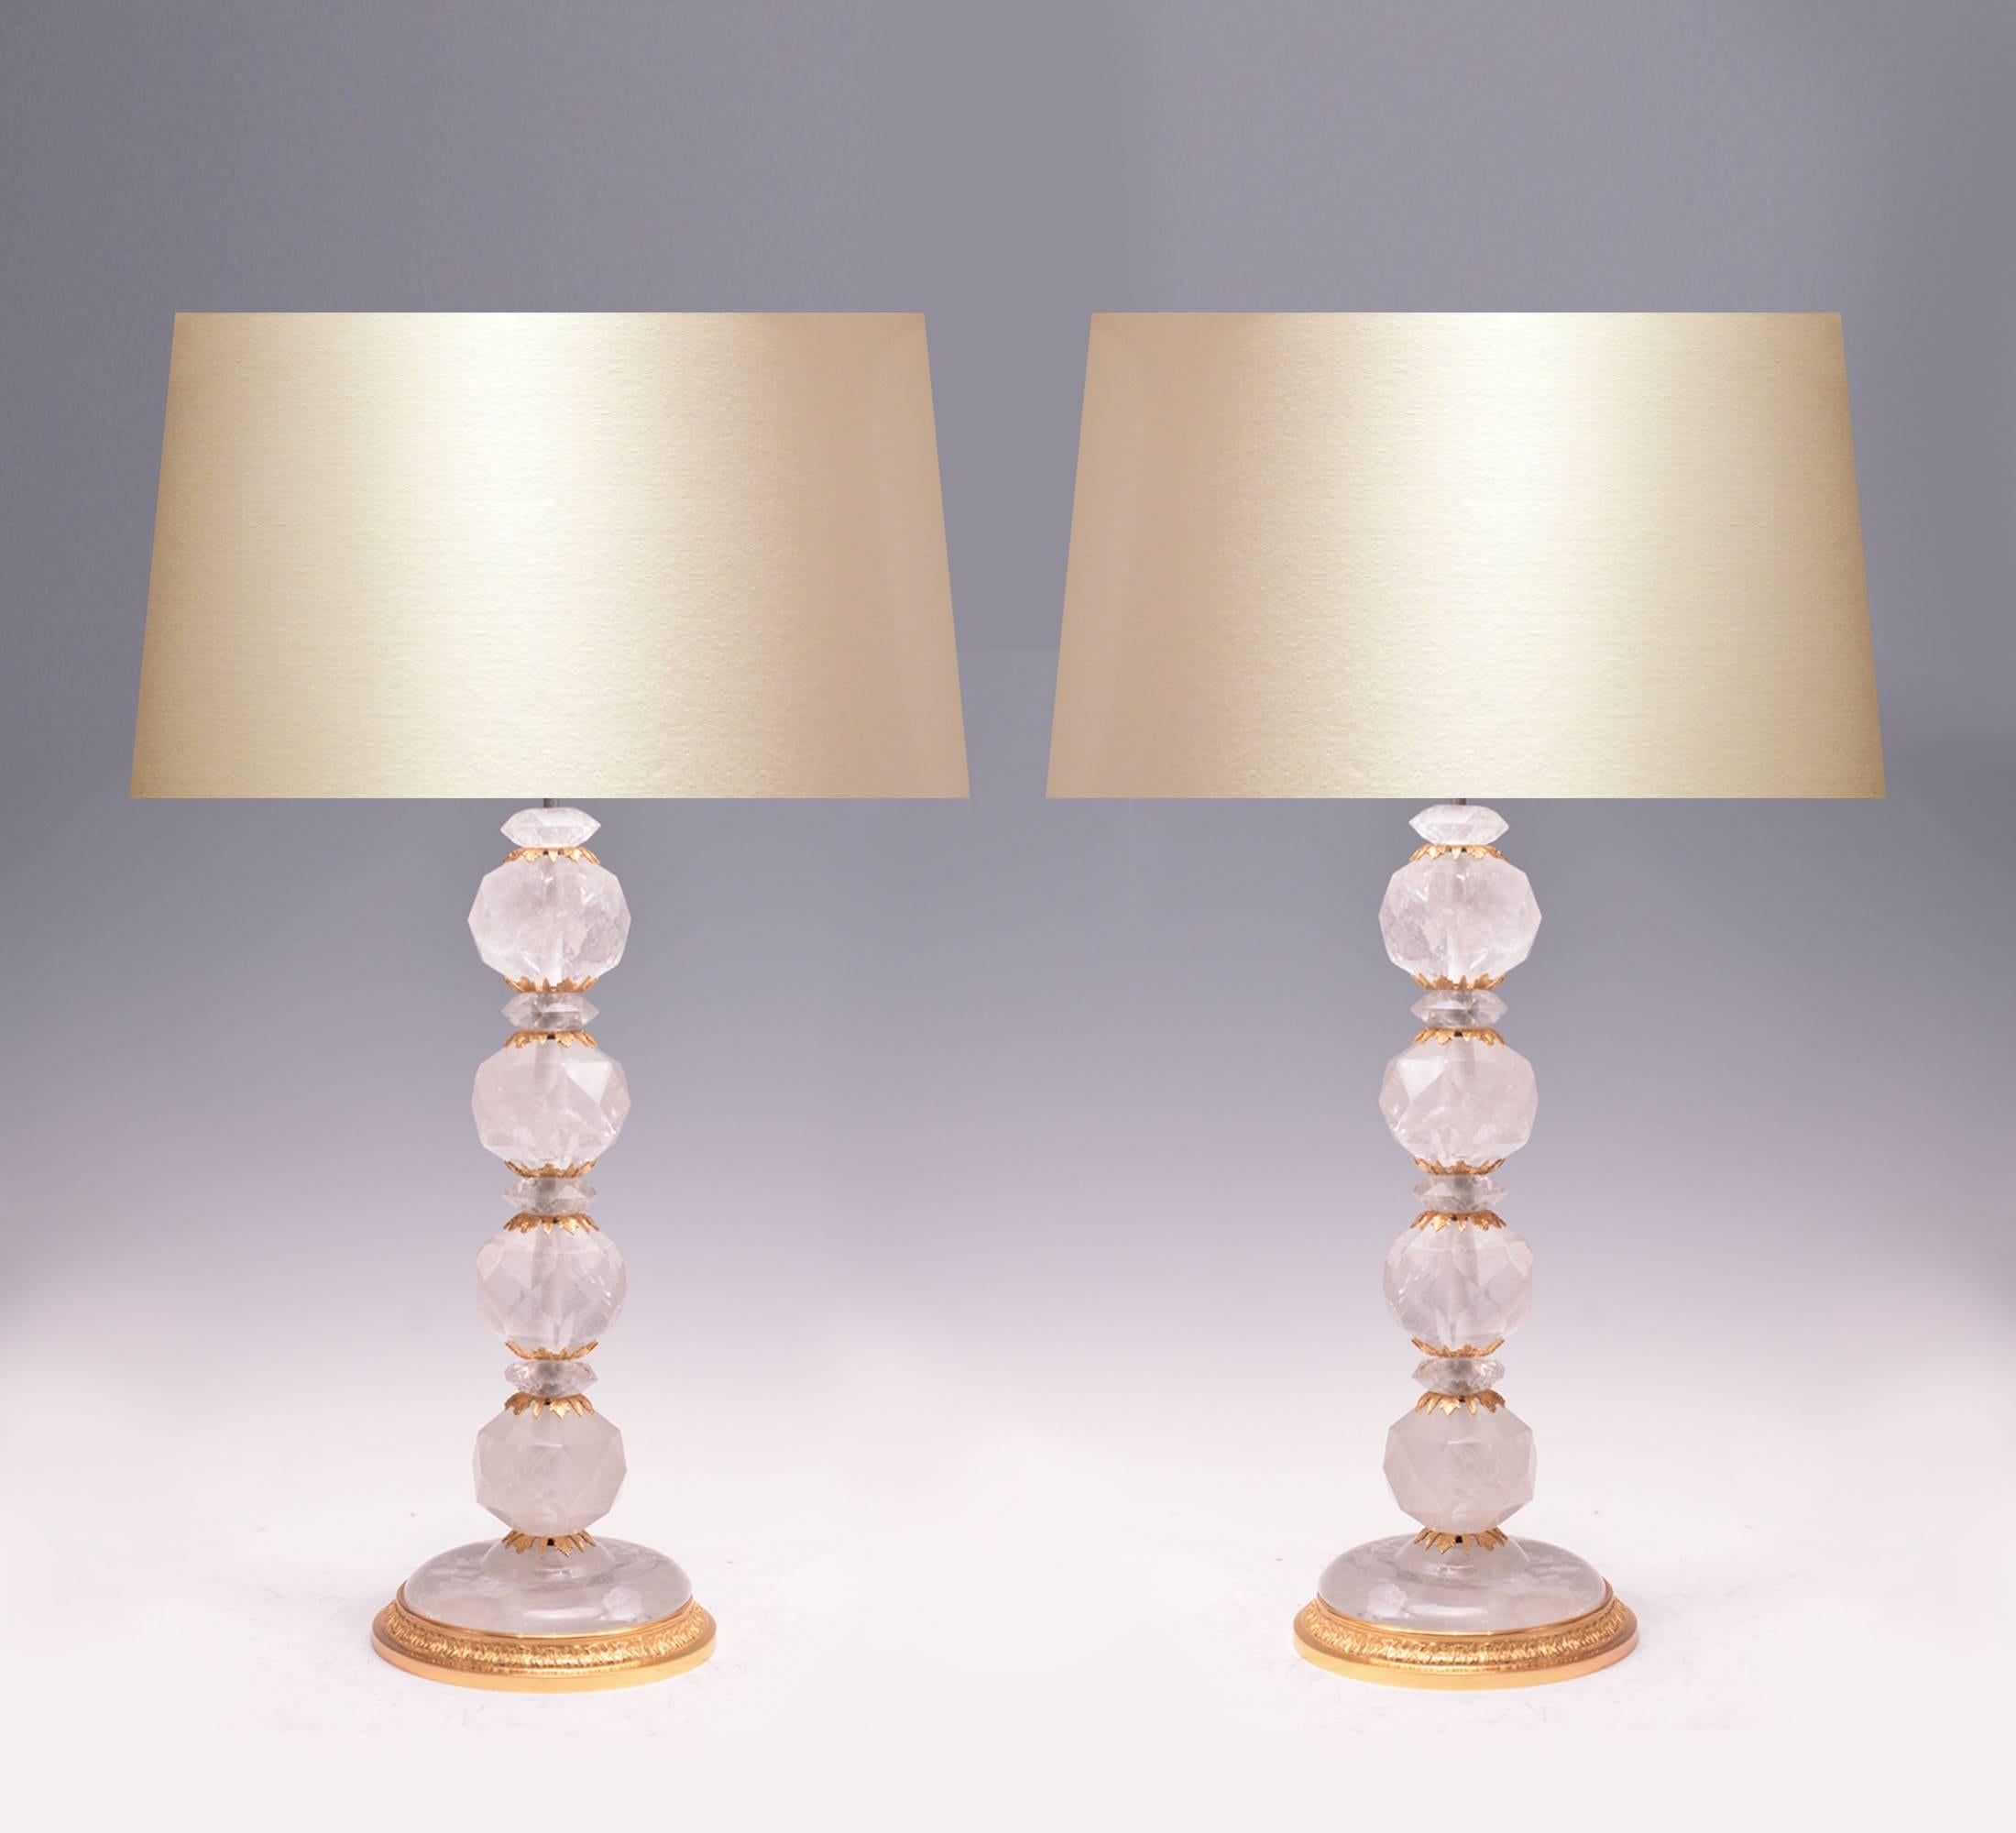 A pair of globe form rock crystal quartz lamp with diamond form rock crystal decorations inserted, fine ormolu-mounted, created by Phoenix Gallery, NYC.
Measure: To the rock crystal: 18.5